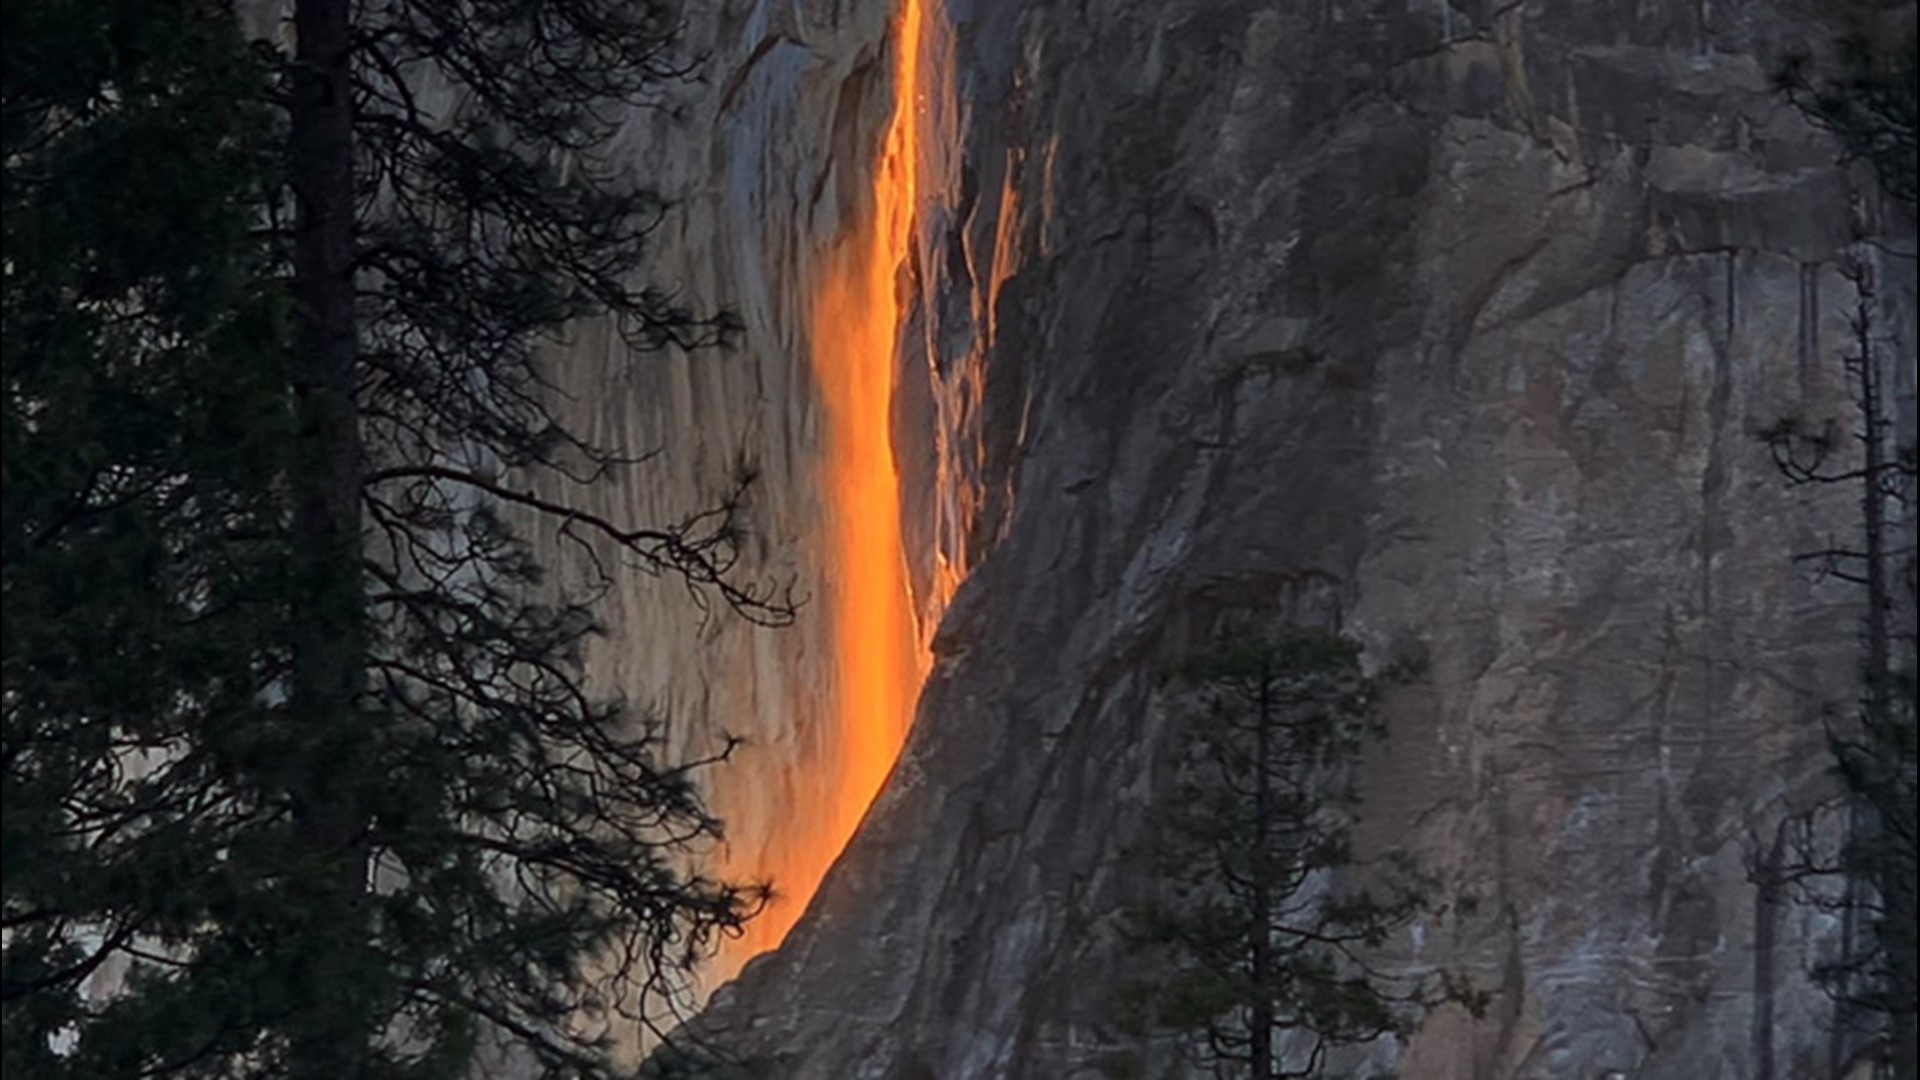 People travel from all over the country to Yosemite National Park to see the rare winter phenomenon known as firefall at Horsetail Falls. AccuWeather's Emmy Victor spoke to some visitors ahead of the spectacle on an especially nice day for viewing.